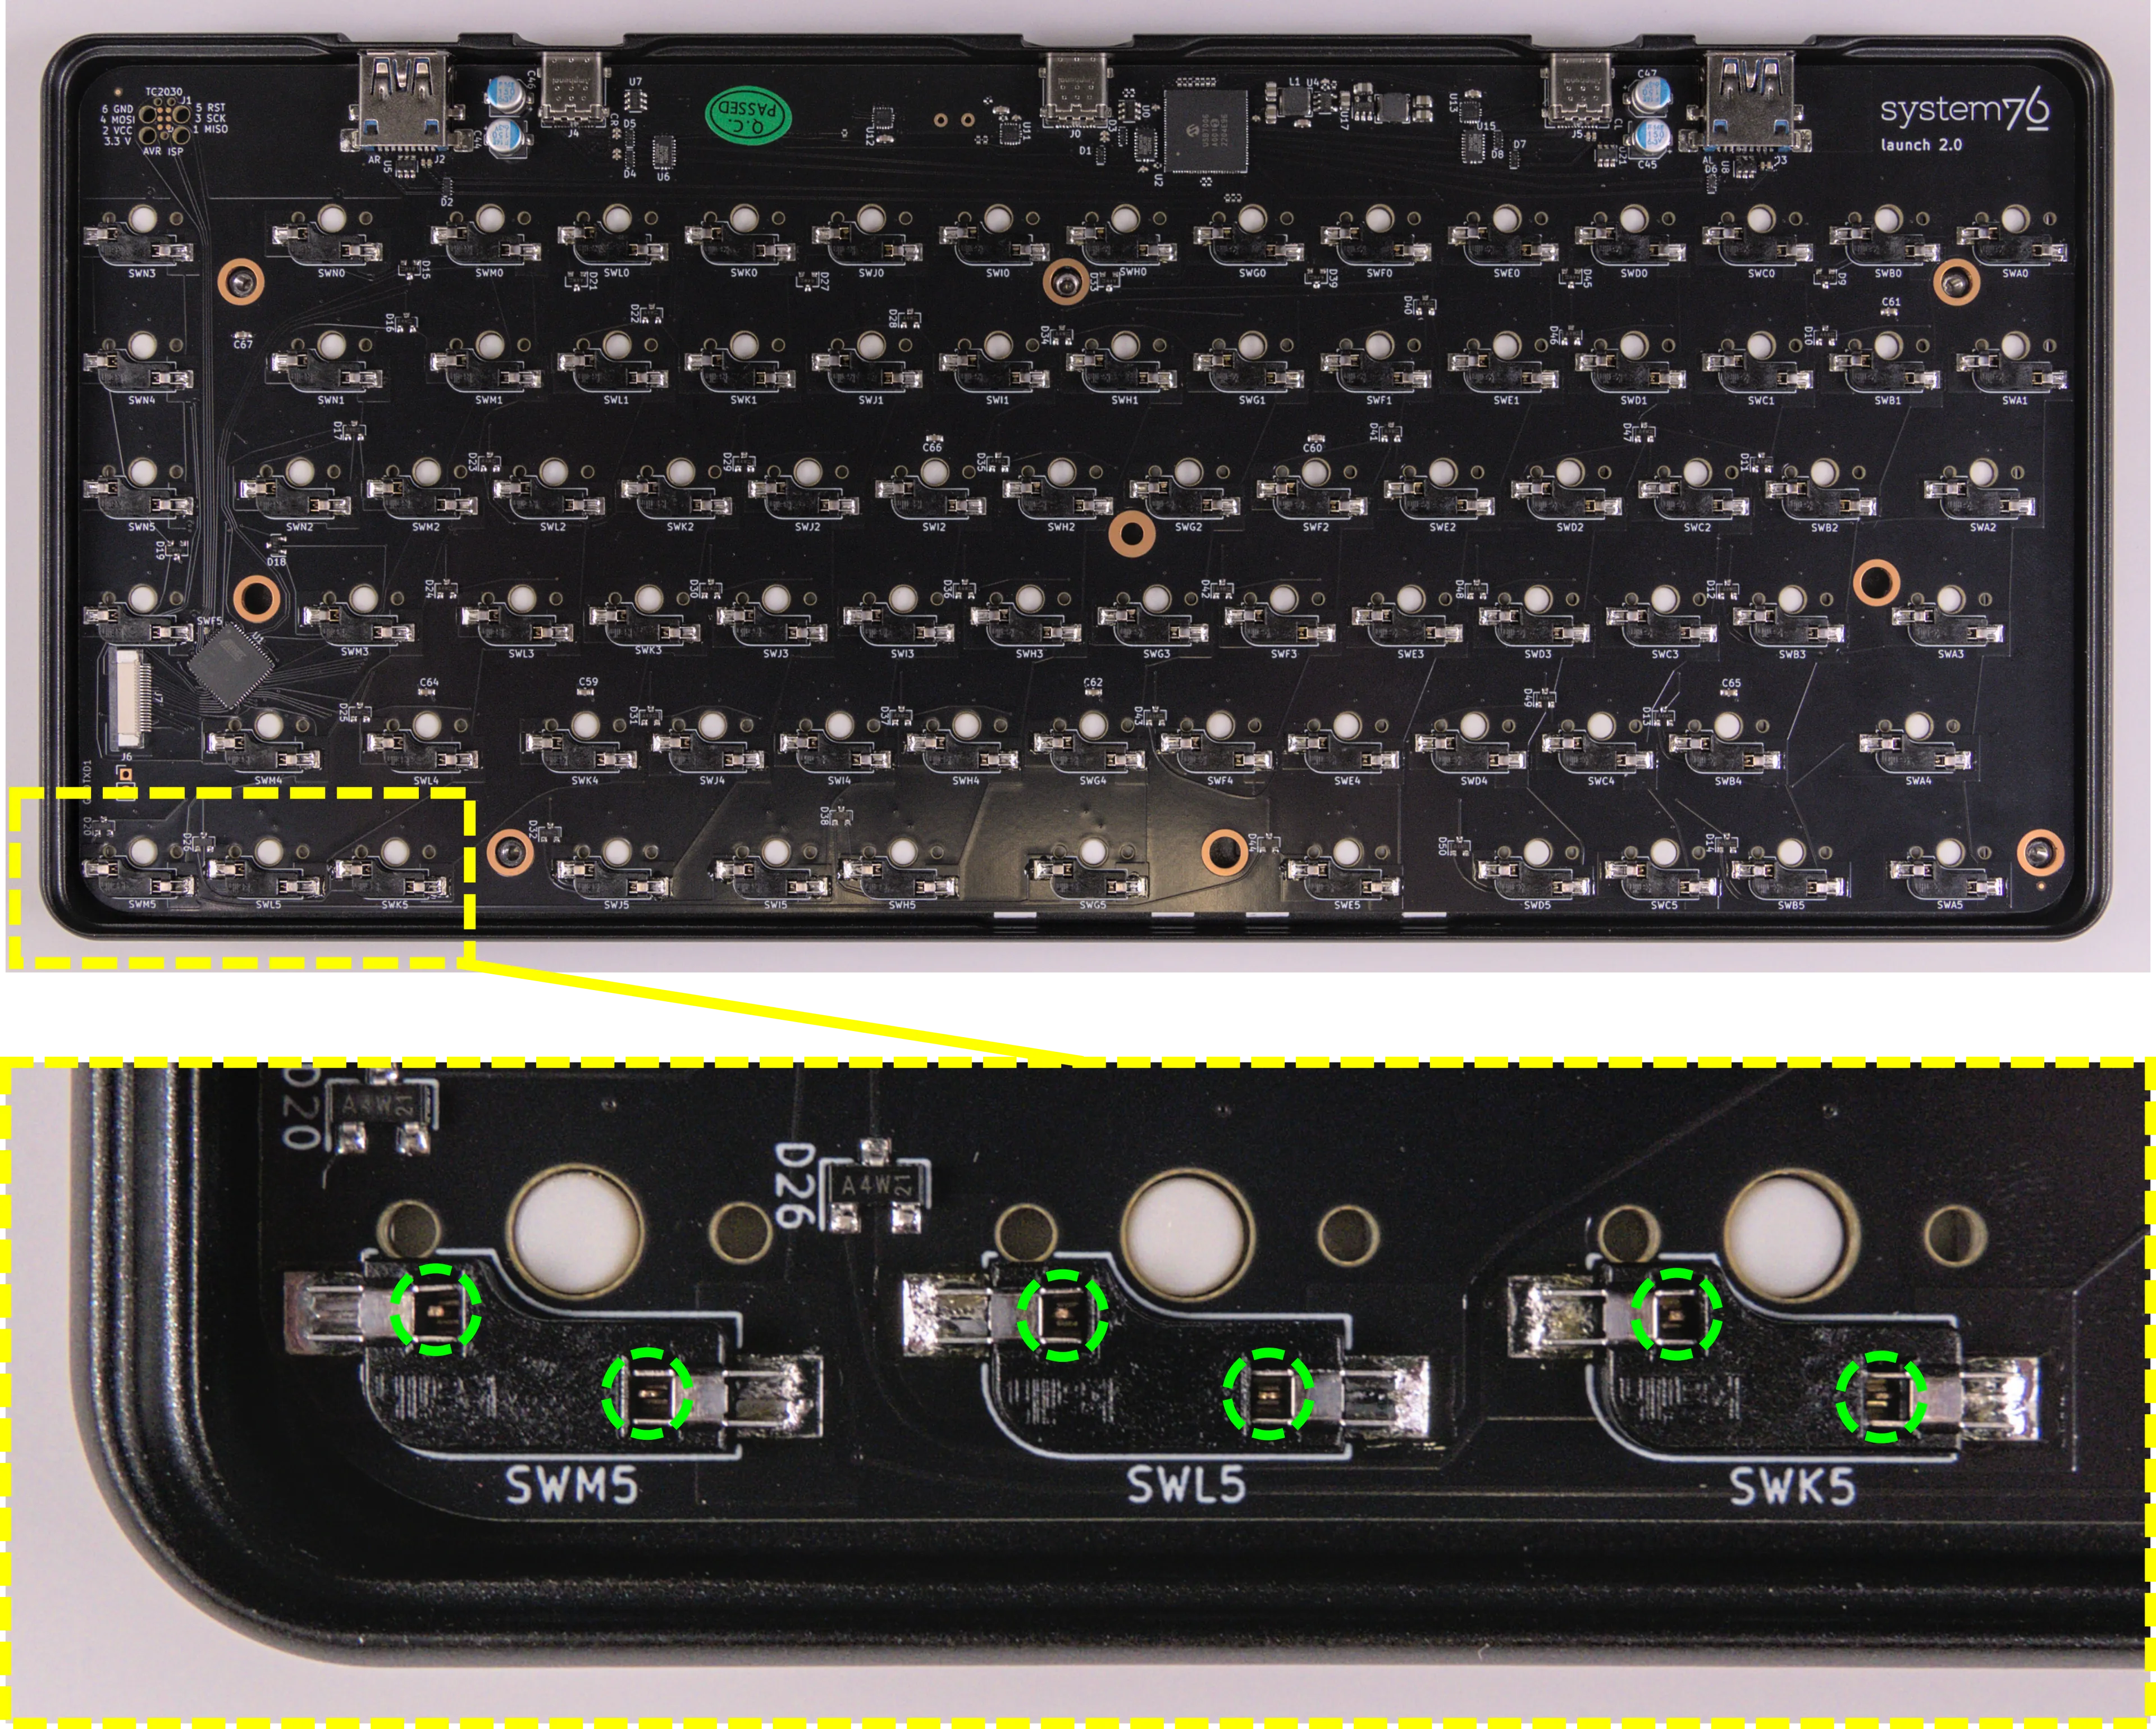 Switch pins visible through sockets